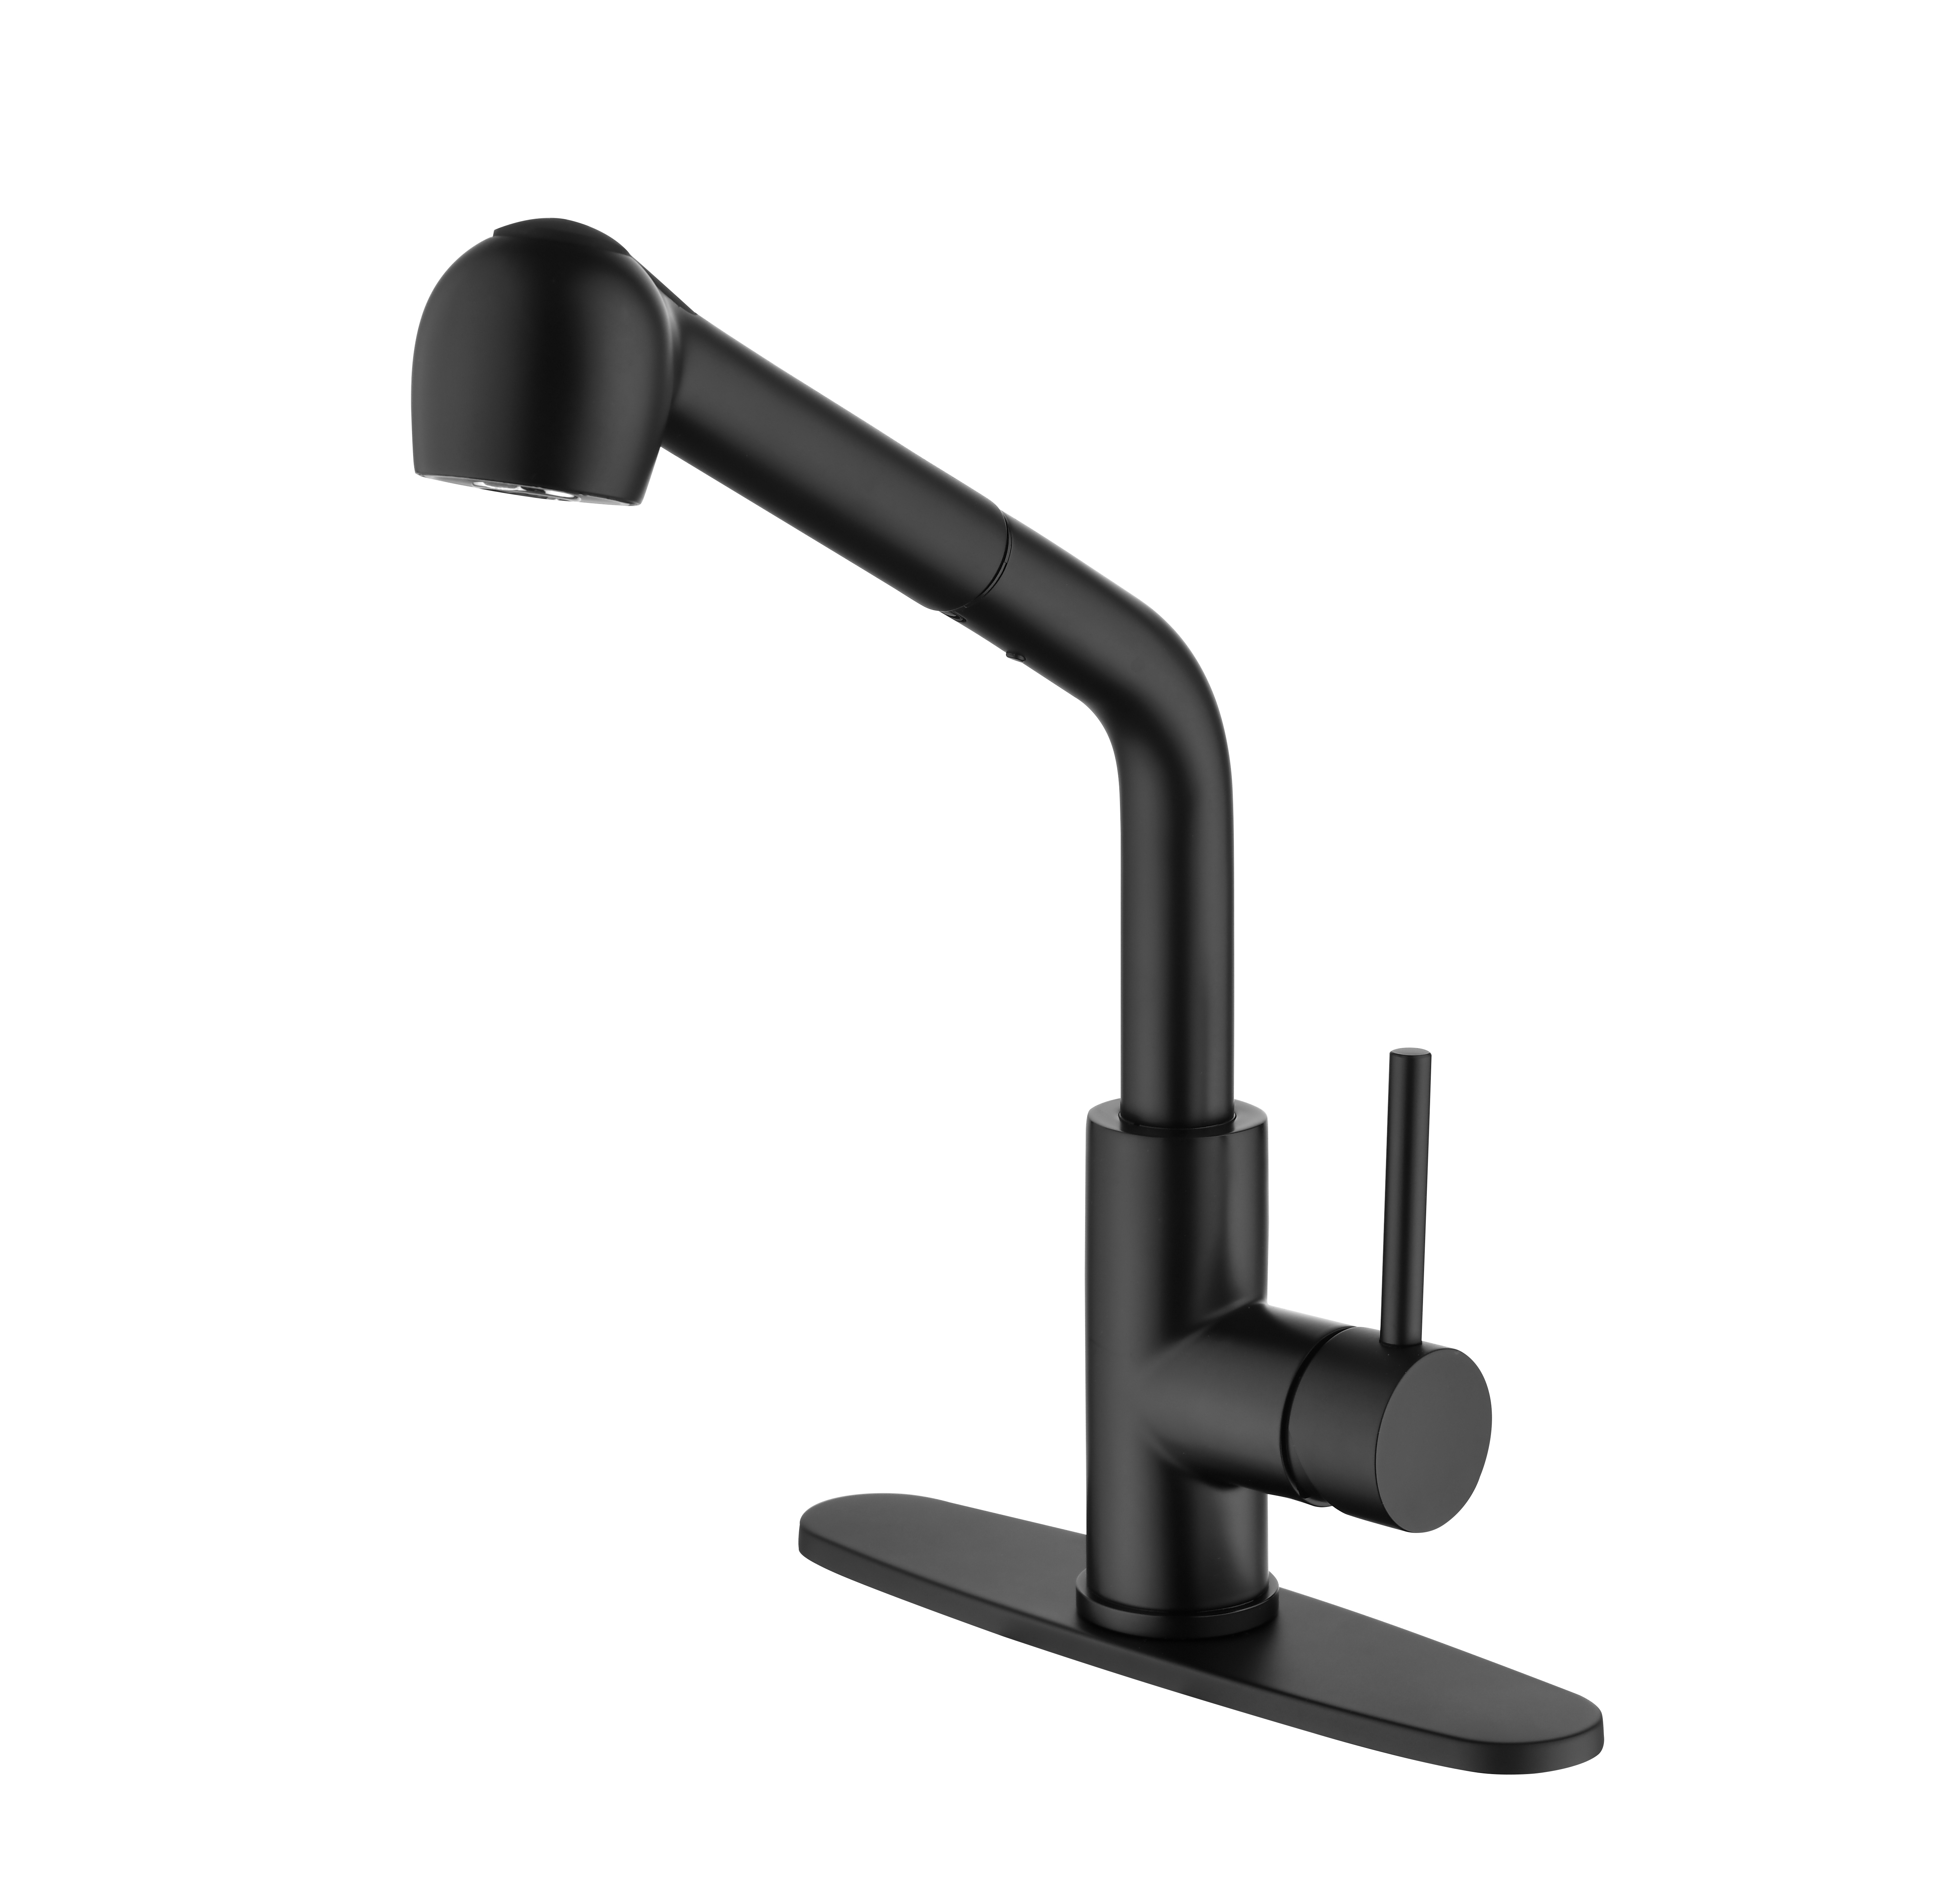 Matte Black Kitchen Faucets with Pull Down Sprayer, Single Handle Kitchen Sink Faucet with Pull Out Sprayer-CASAINC